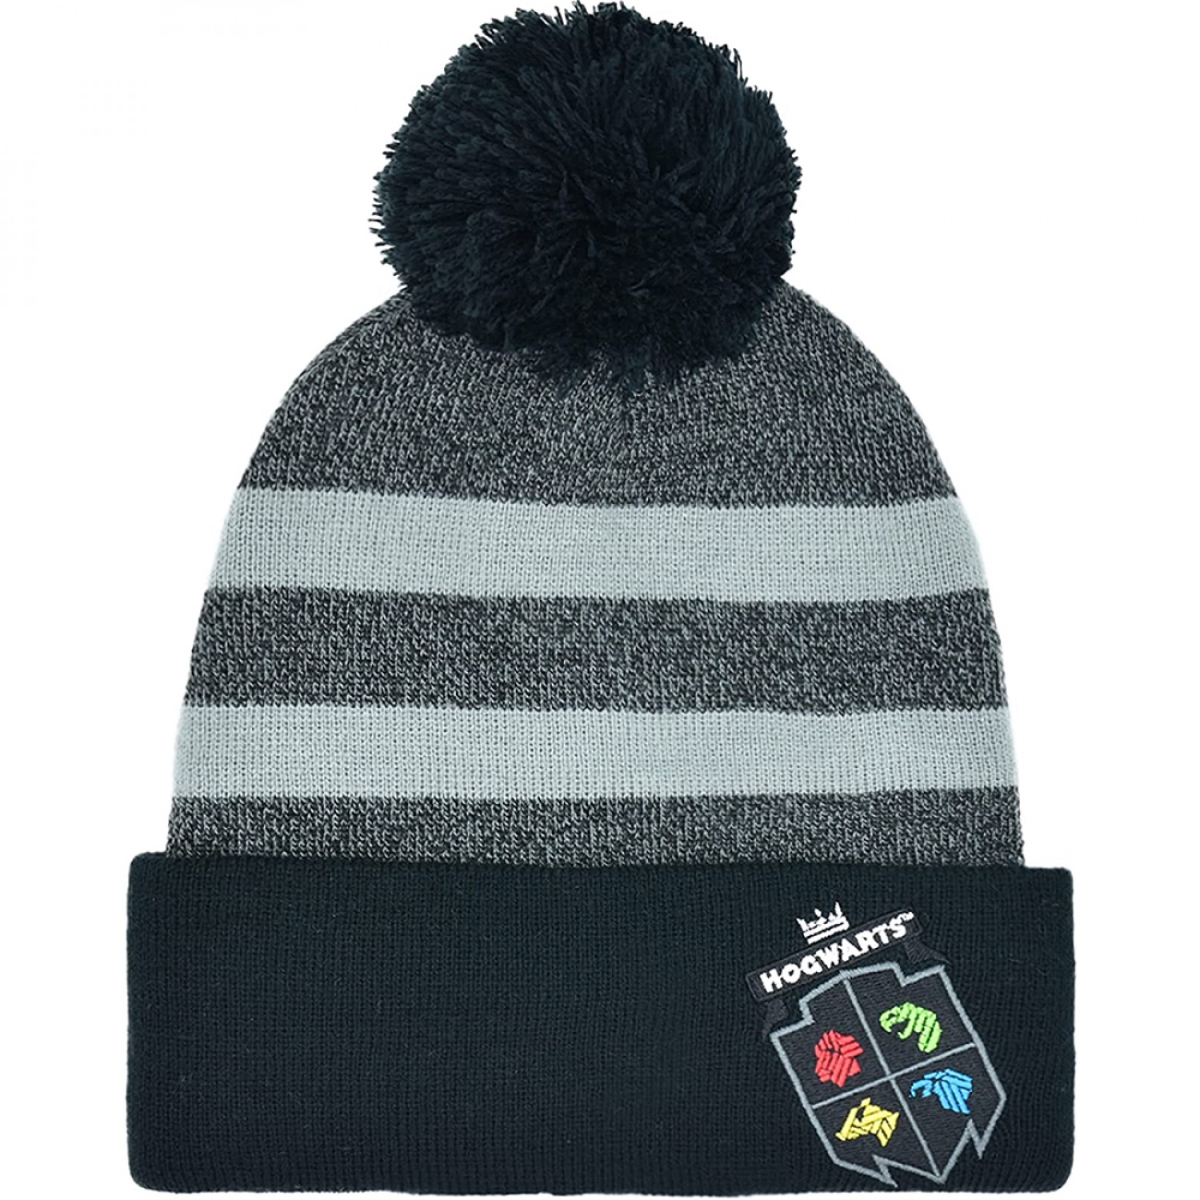 Picture of Harry Potter 837249 Hogwarts House Crests Patch Cuff Knit Beanie